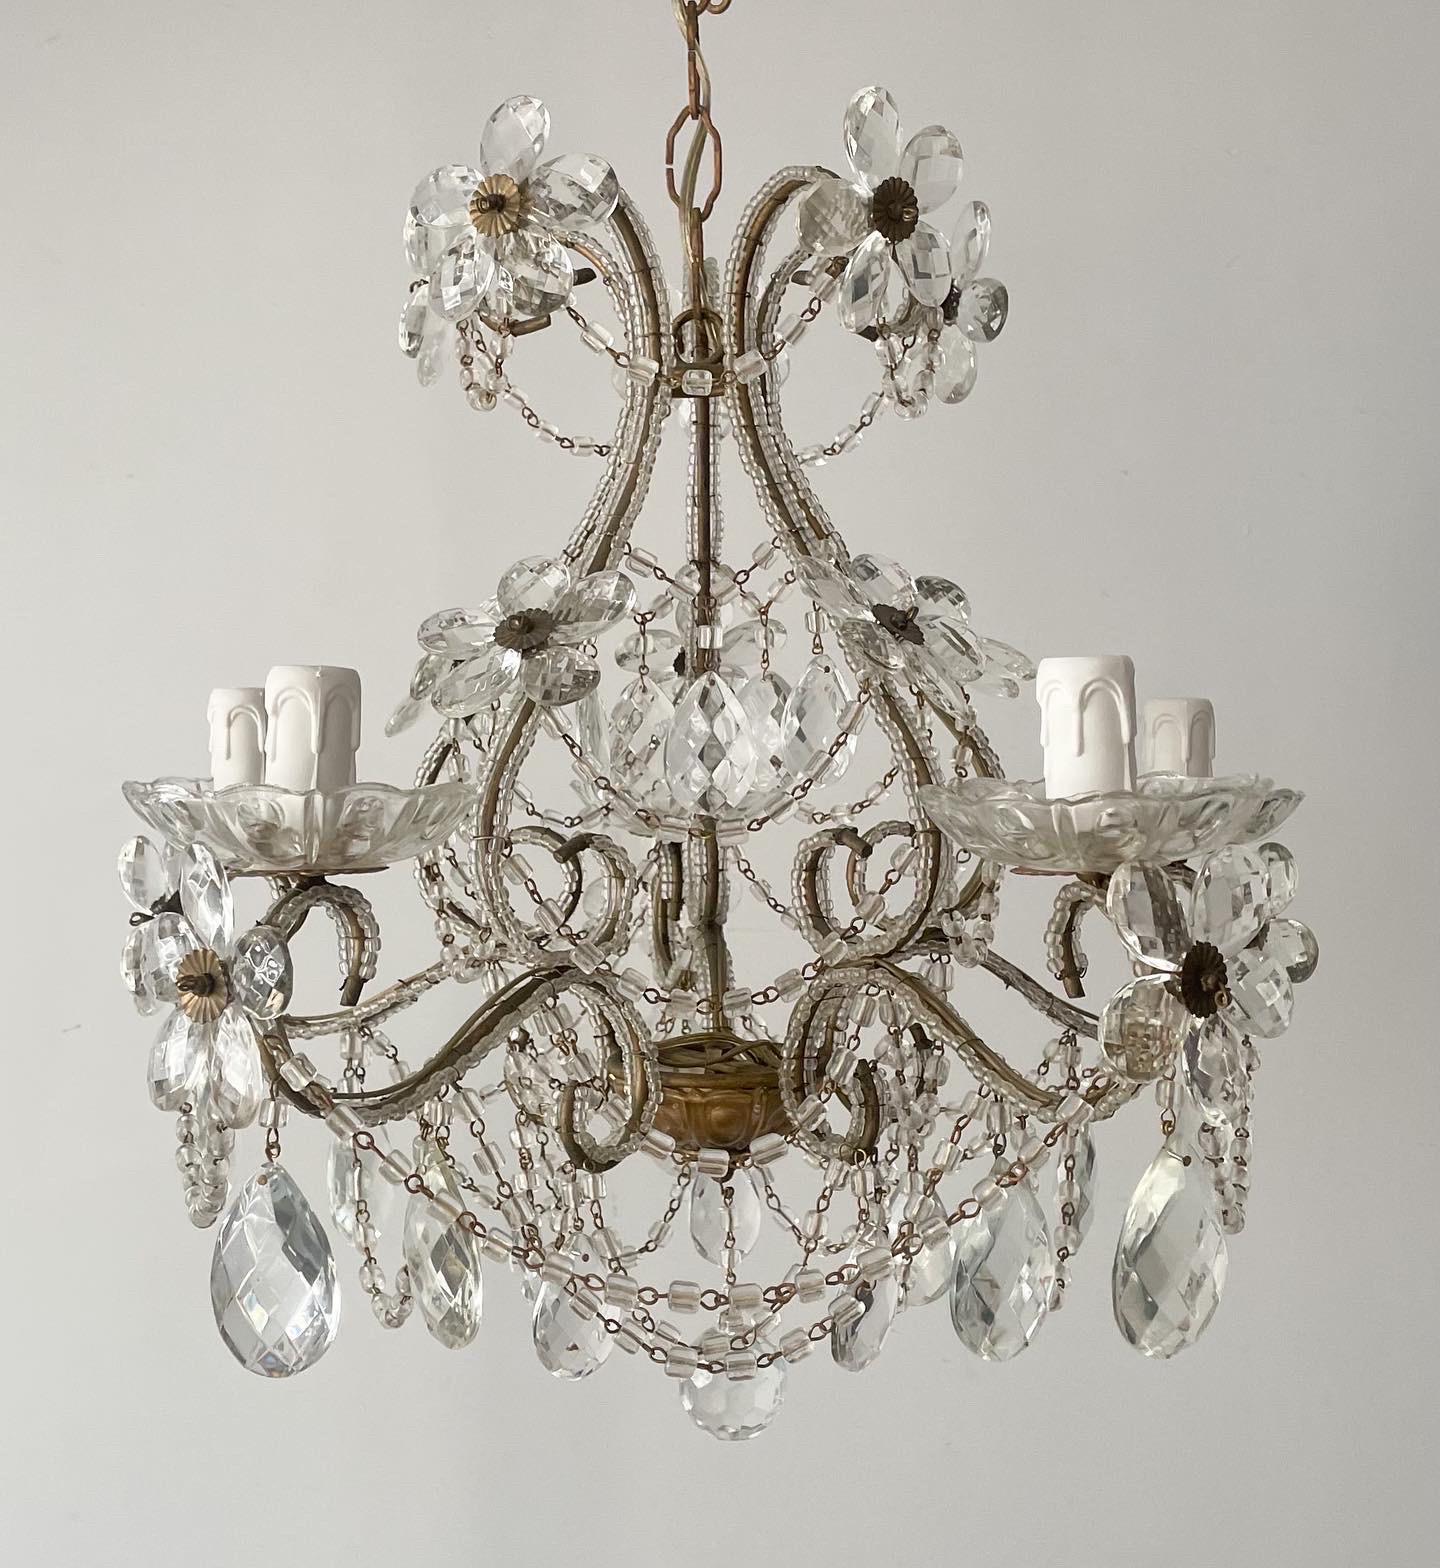 Gorgeous, Italian 1940s petite-scale gilt-iron and crystal beaded chandelier with glass flowers.

The chandelier consists of a scrolled iron frame outline with glass beads, decorated with flowers made of crystal prisms and macaroni glass swags.